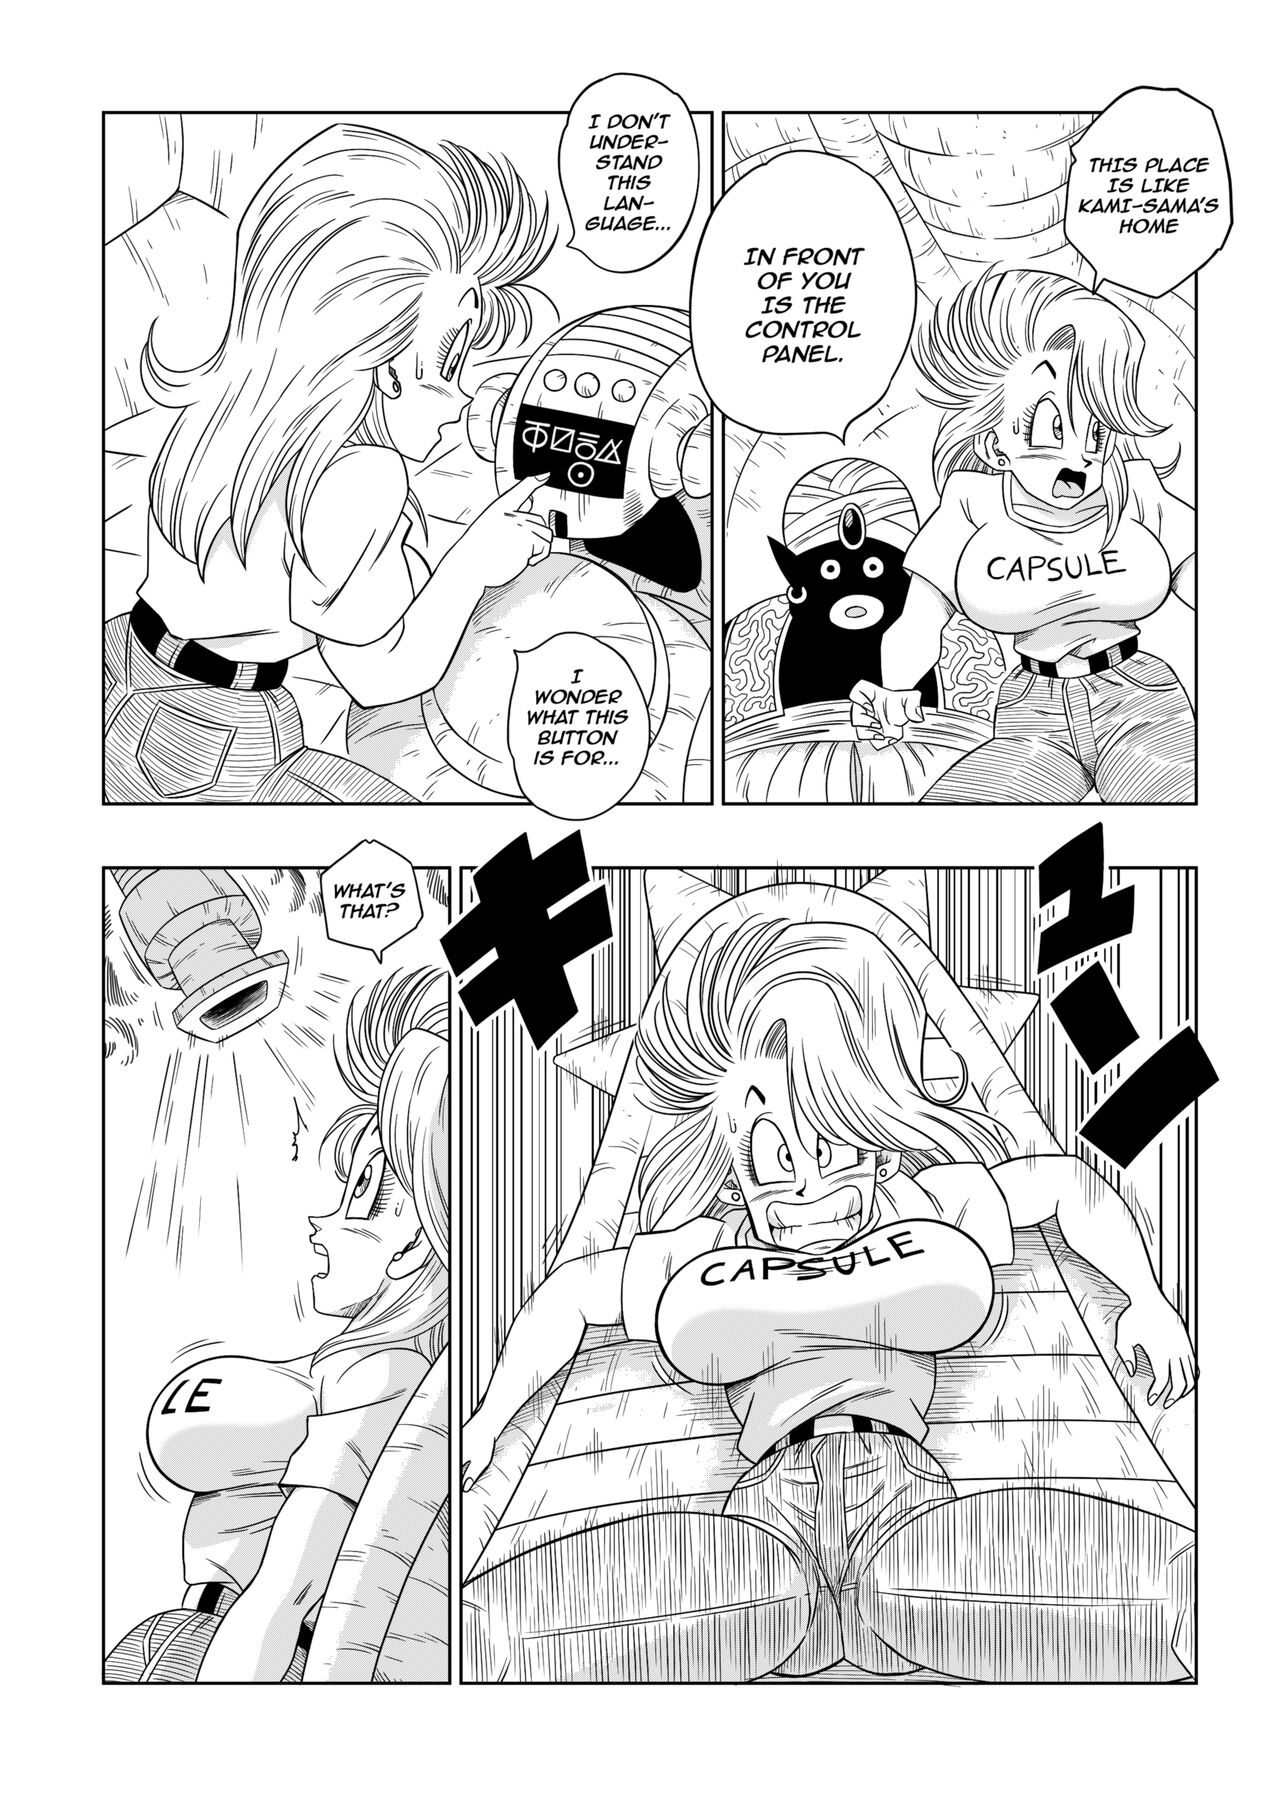 Bulma Meets Mr.Popo - Sex inside the Mysterious Spaceship! - Page 6 -  IMHentai